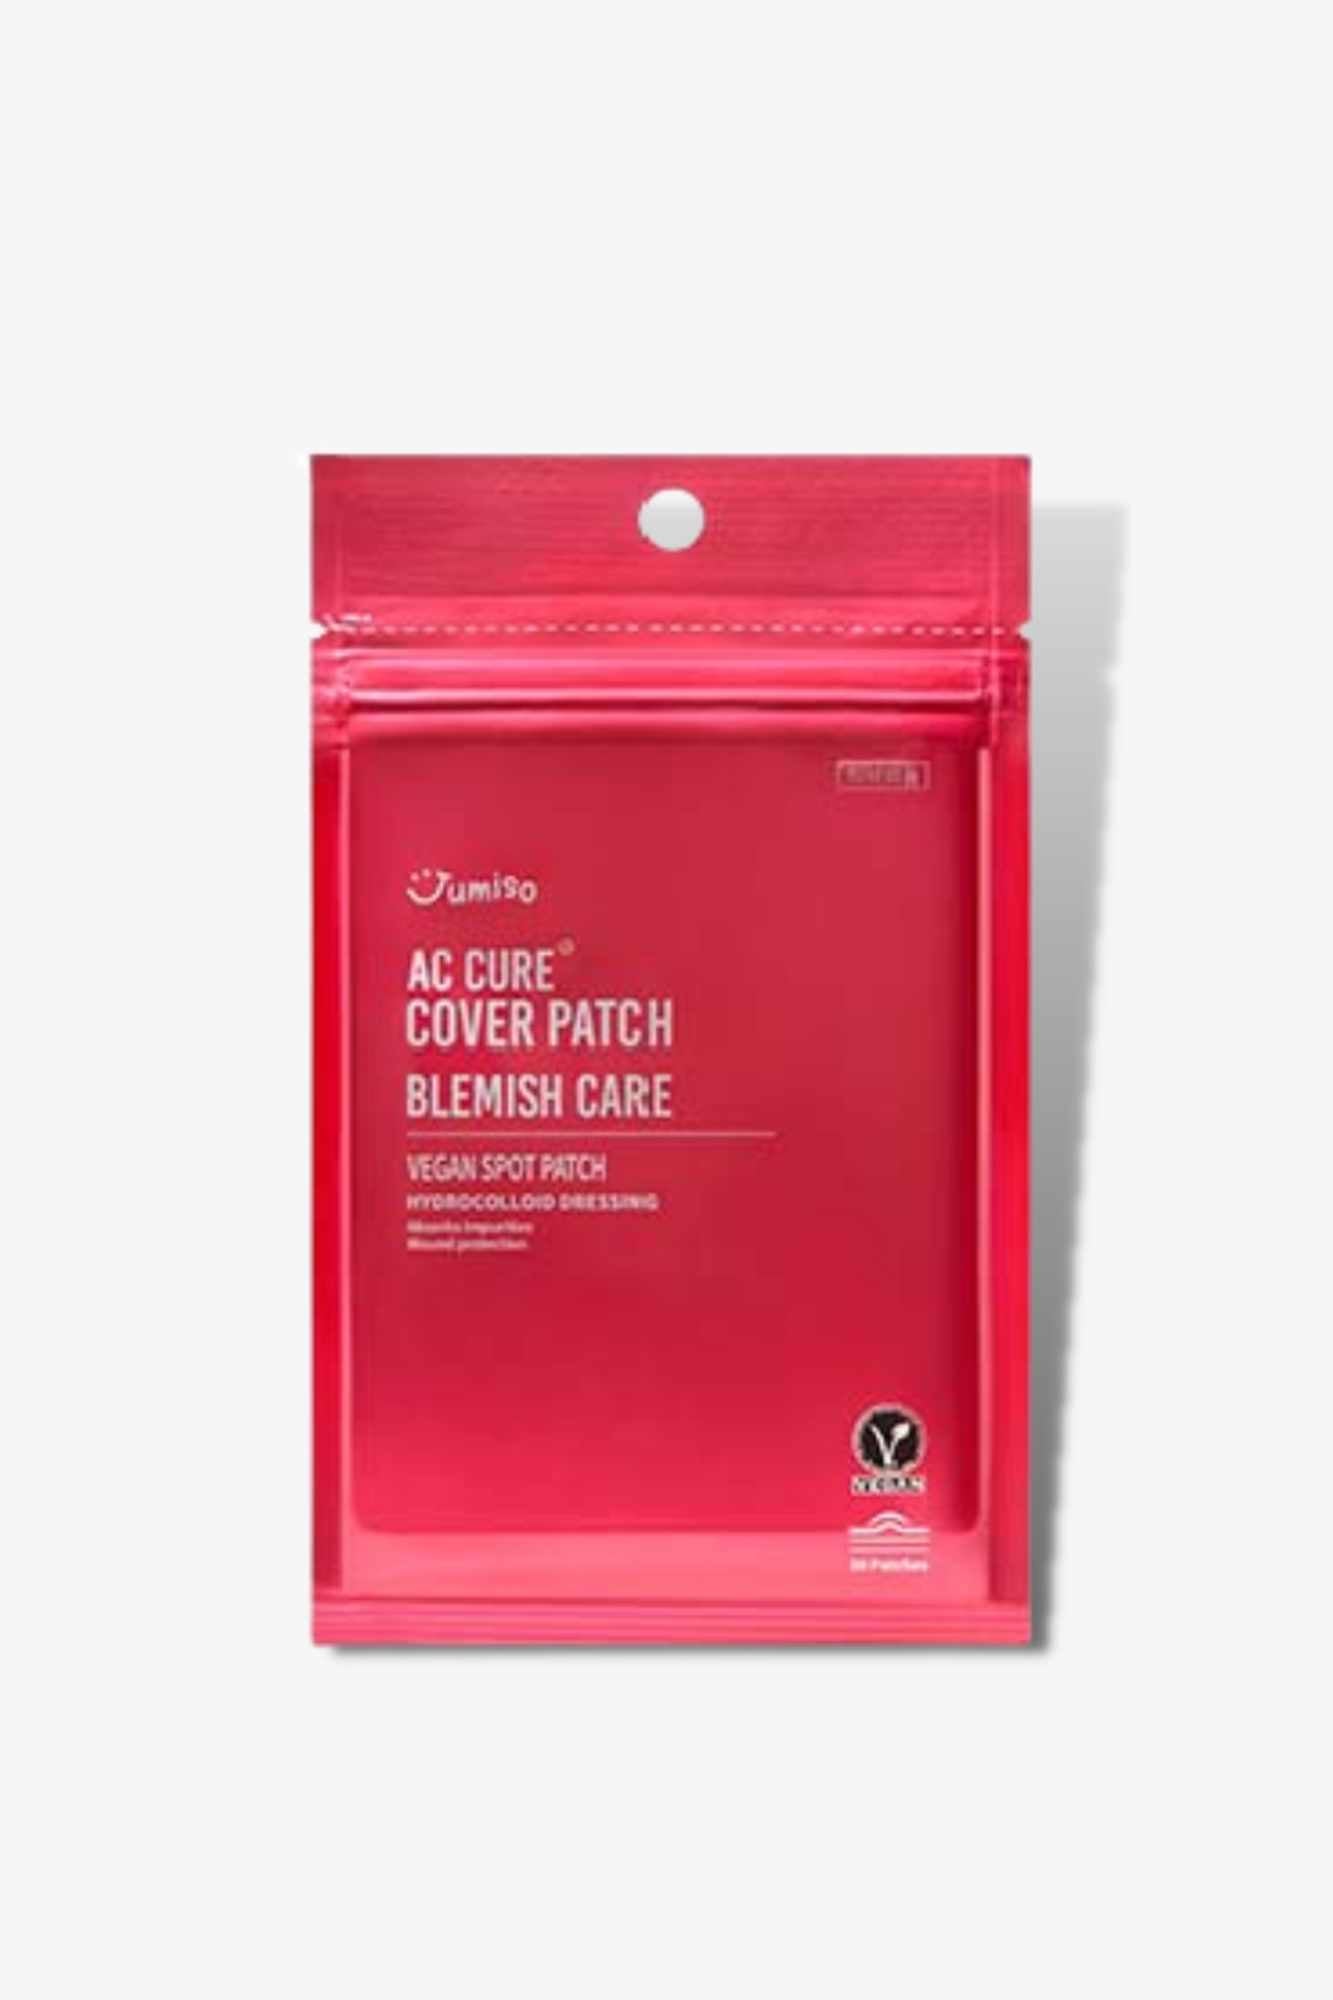 Jumiso - AC Cure Cover Patch Blemish Care - 30 patches